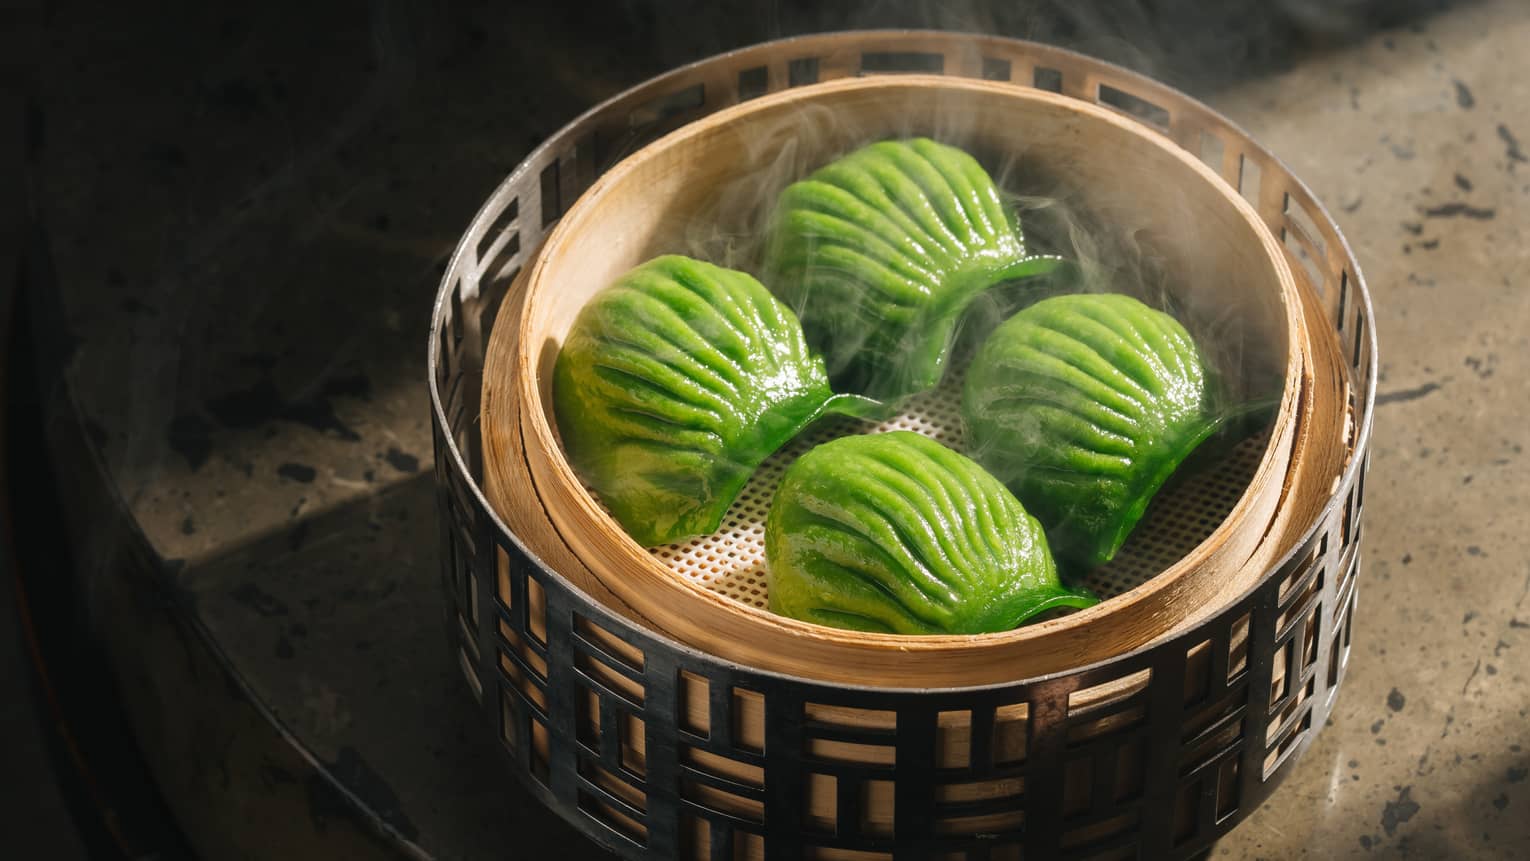 Four green shell-shaped dumplings in traditional bamboo steamer